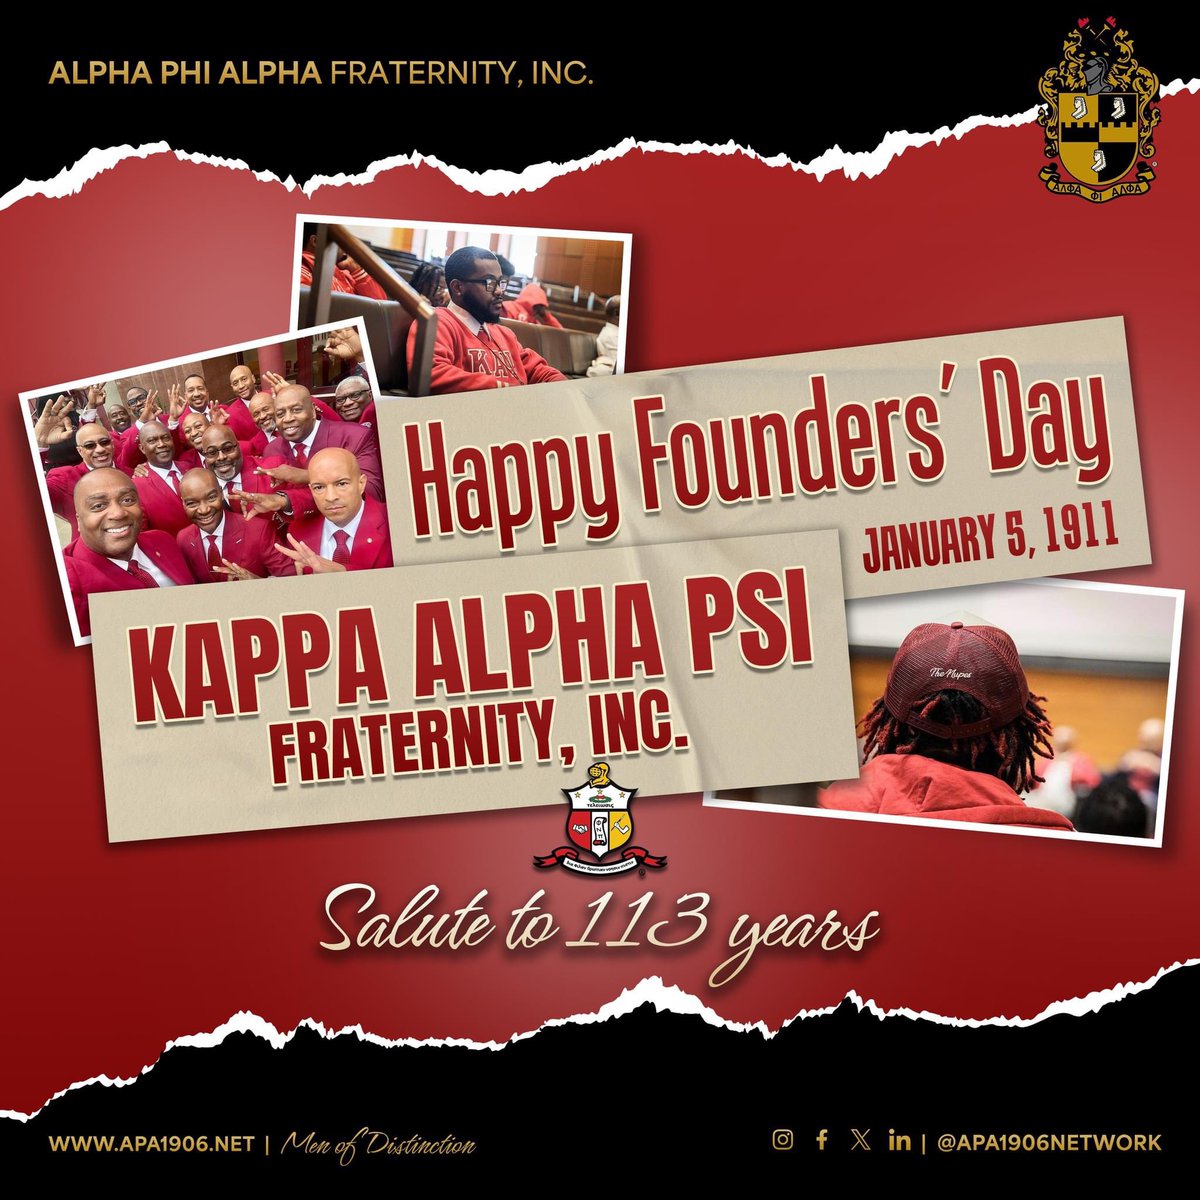 Happy Founders Day to the good Brothers of Kappa Alpha Psi Fraternity Incorporated. Cheers to 113!